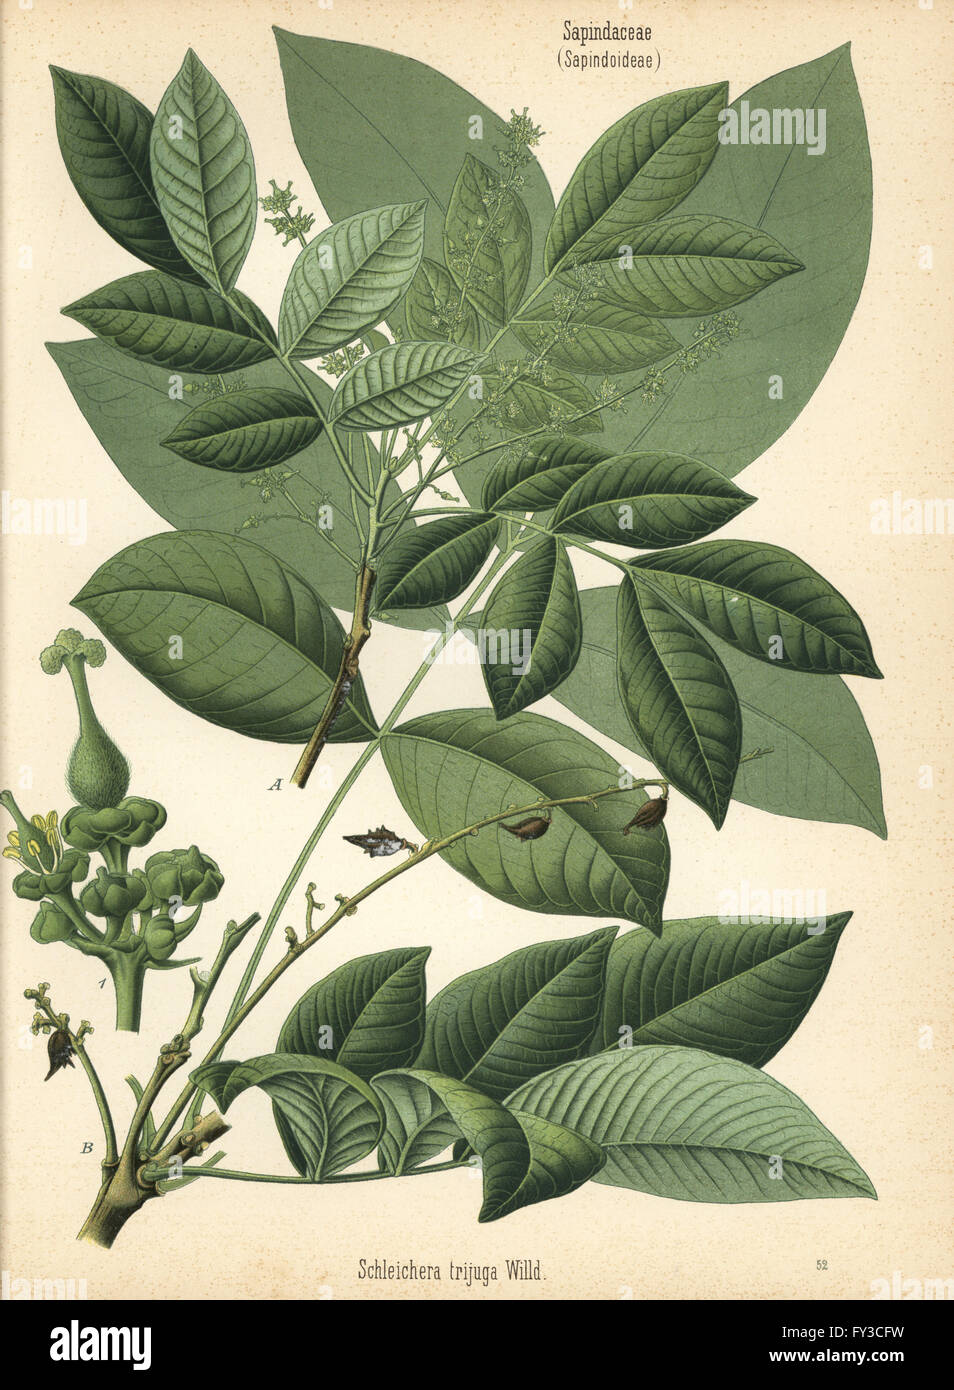 Soapberry, Schleichera trijuga. Chromolithograph after a botanical illustration from Hermann Adolph Koehler's Medicinal Plants, edited by Gustav Pabst, Koehler, Germany, 1887. Stock Photo